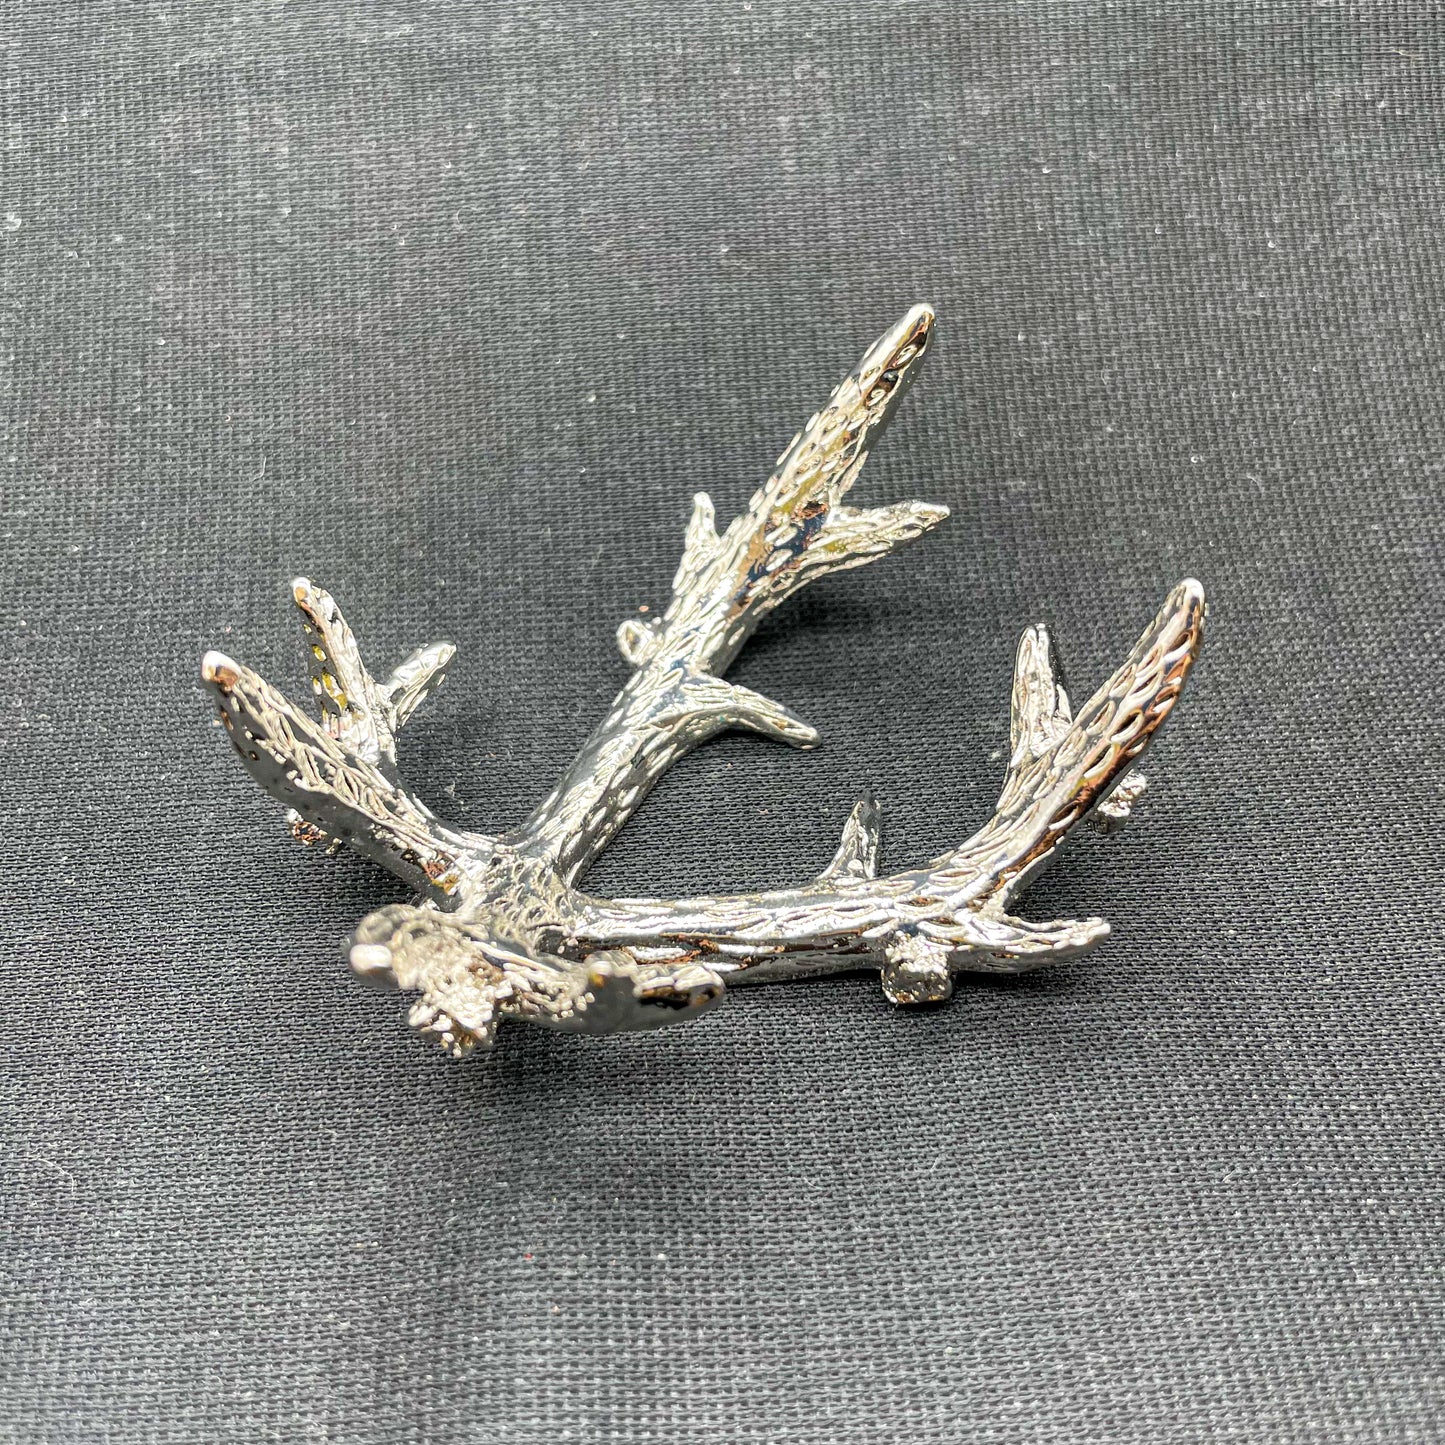 1PC Metal Antler Holder For Crystal Ball Decor Gift A